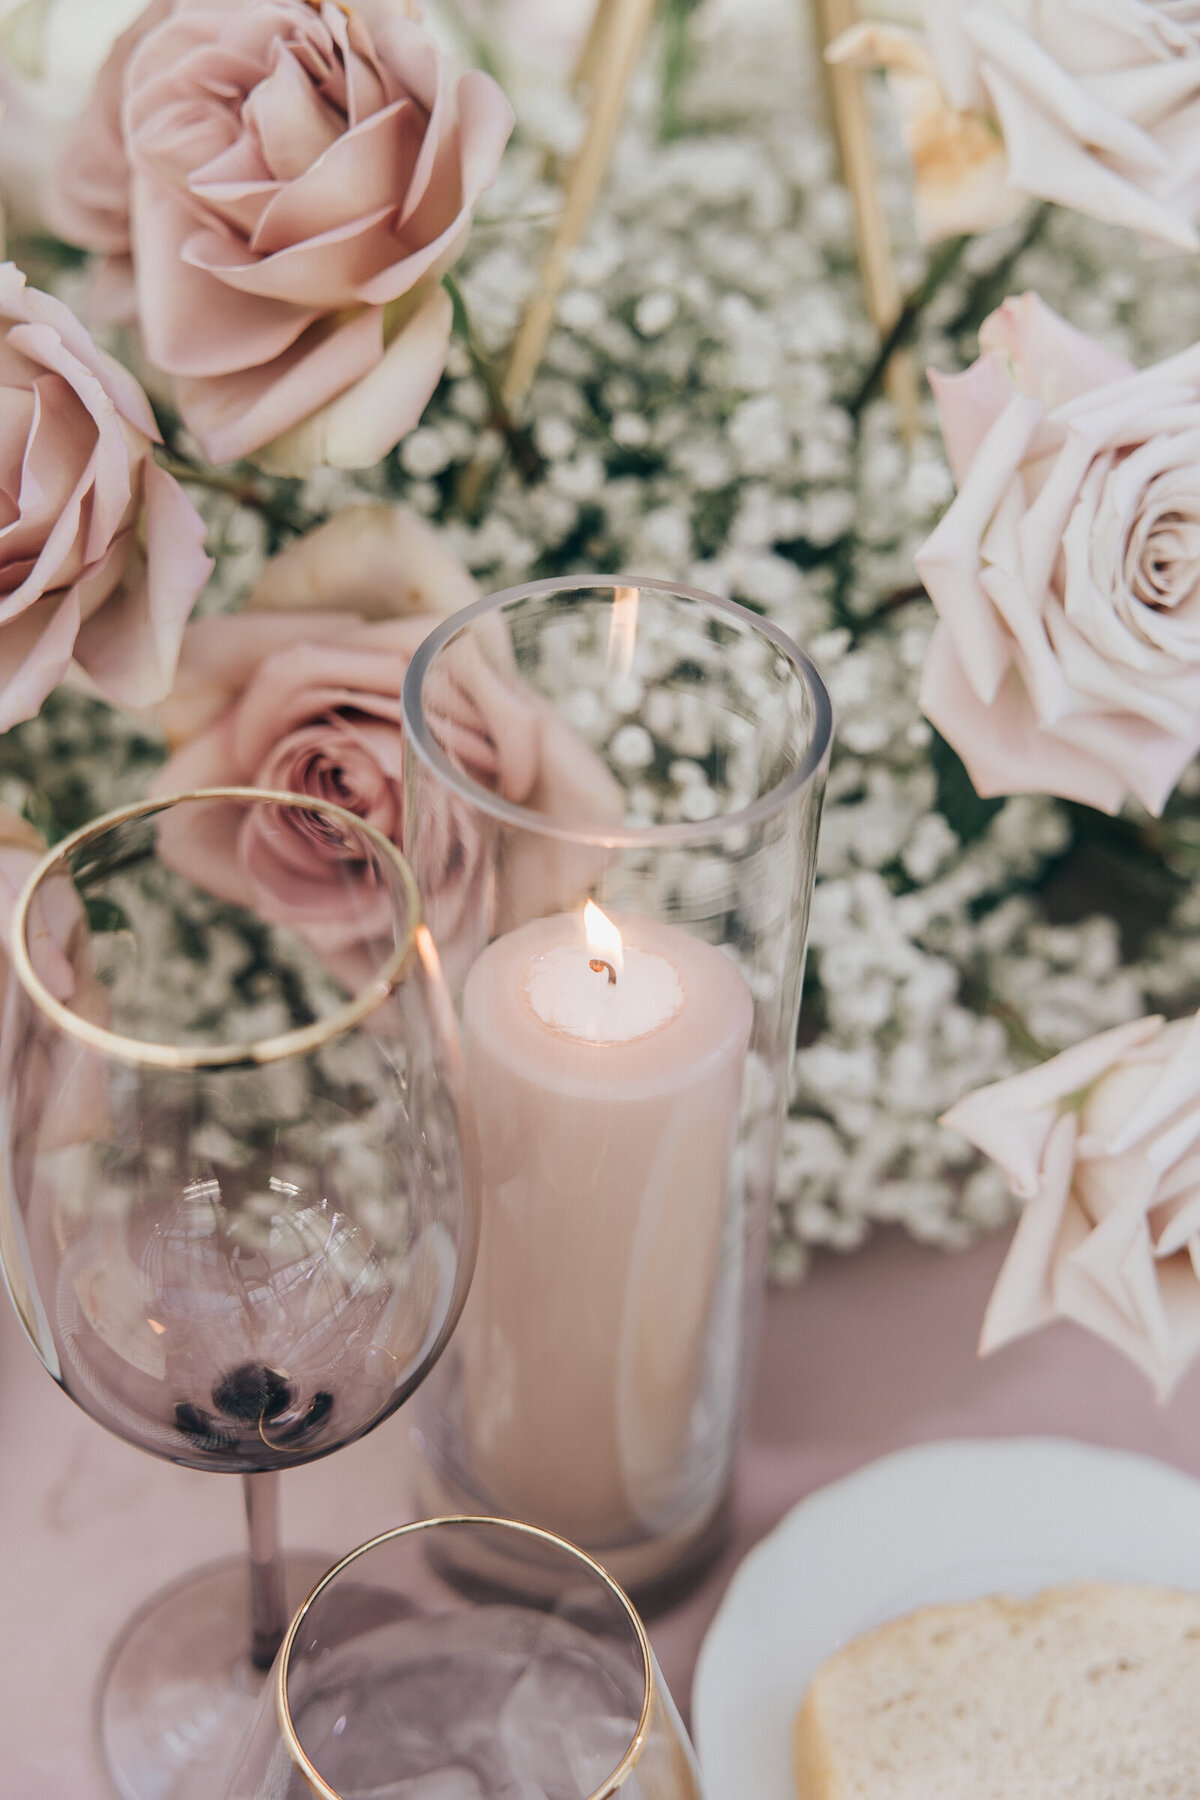 Beautiful candles, roses, and baby's breath at lavender and ivory themed wedding reception